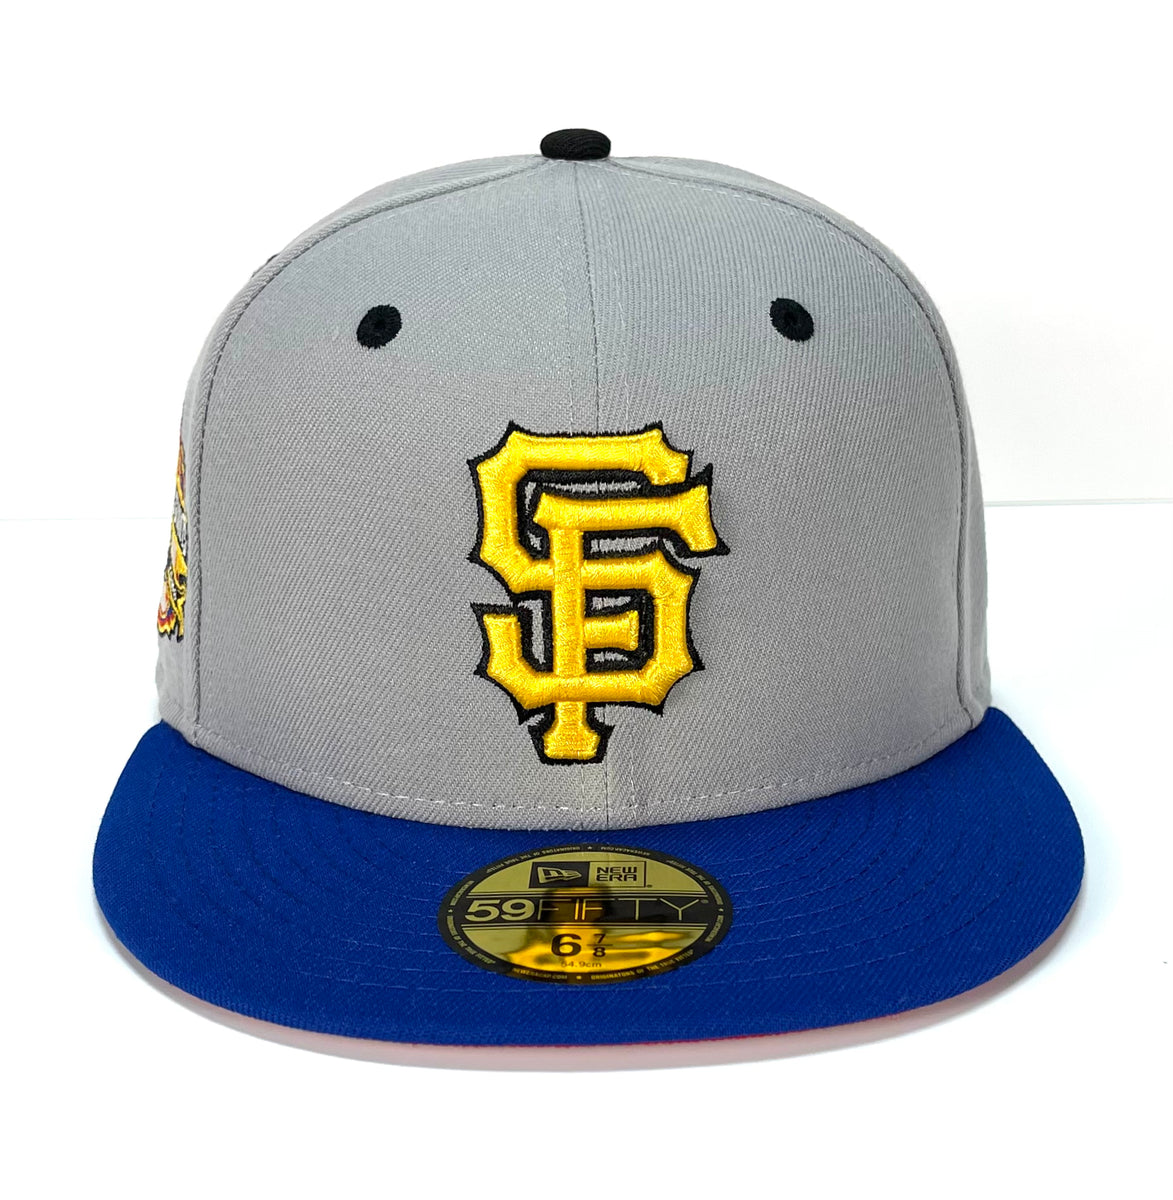 San Francisco Giants (Gigantes) 60th Anniversary New Era 59FIFTY Fitted Hat (Night Shift Navy, Misty Morning Gray Gray Under BRIM) 7 1/4